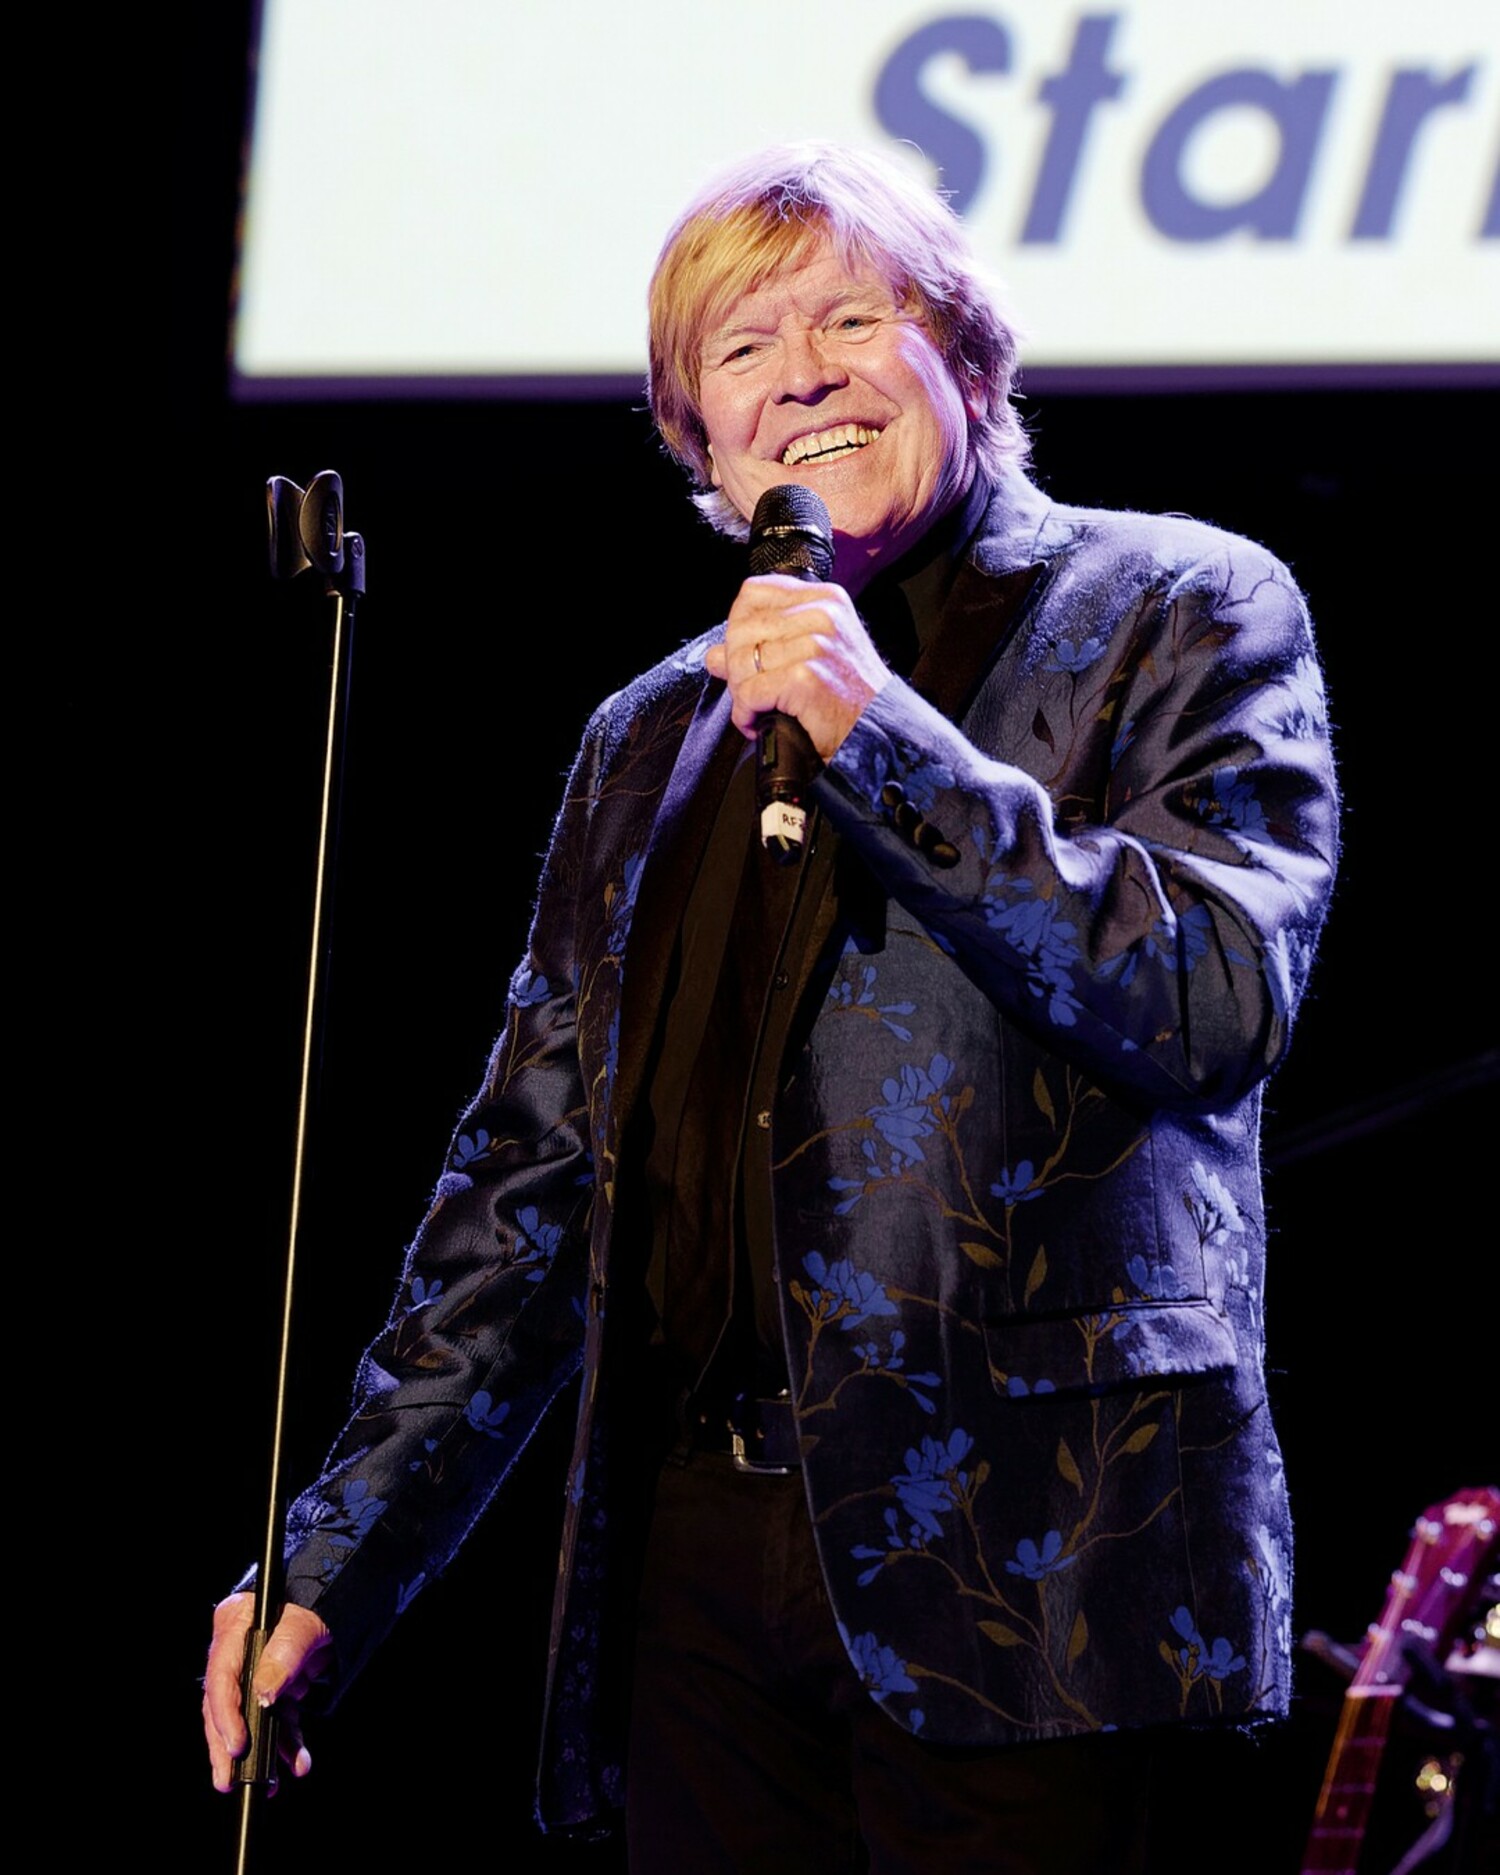 Peter Noone of the Herman's Hermits performs at The Suffolk on May 10. COURTESY THE SUFFOLK